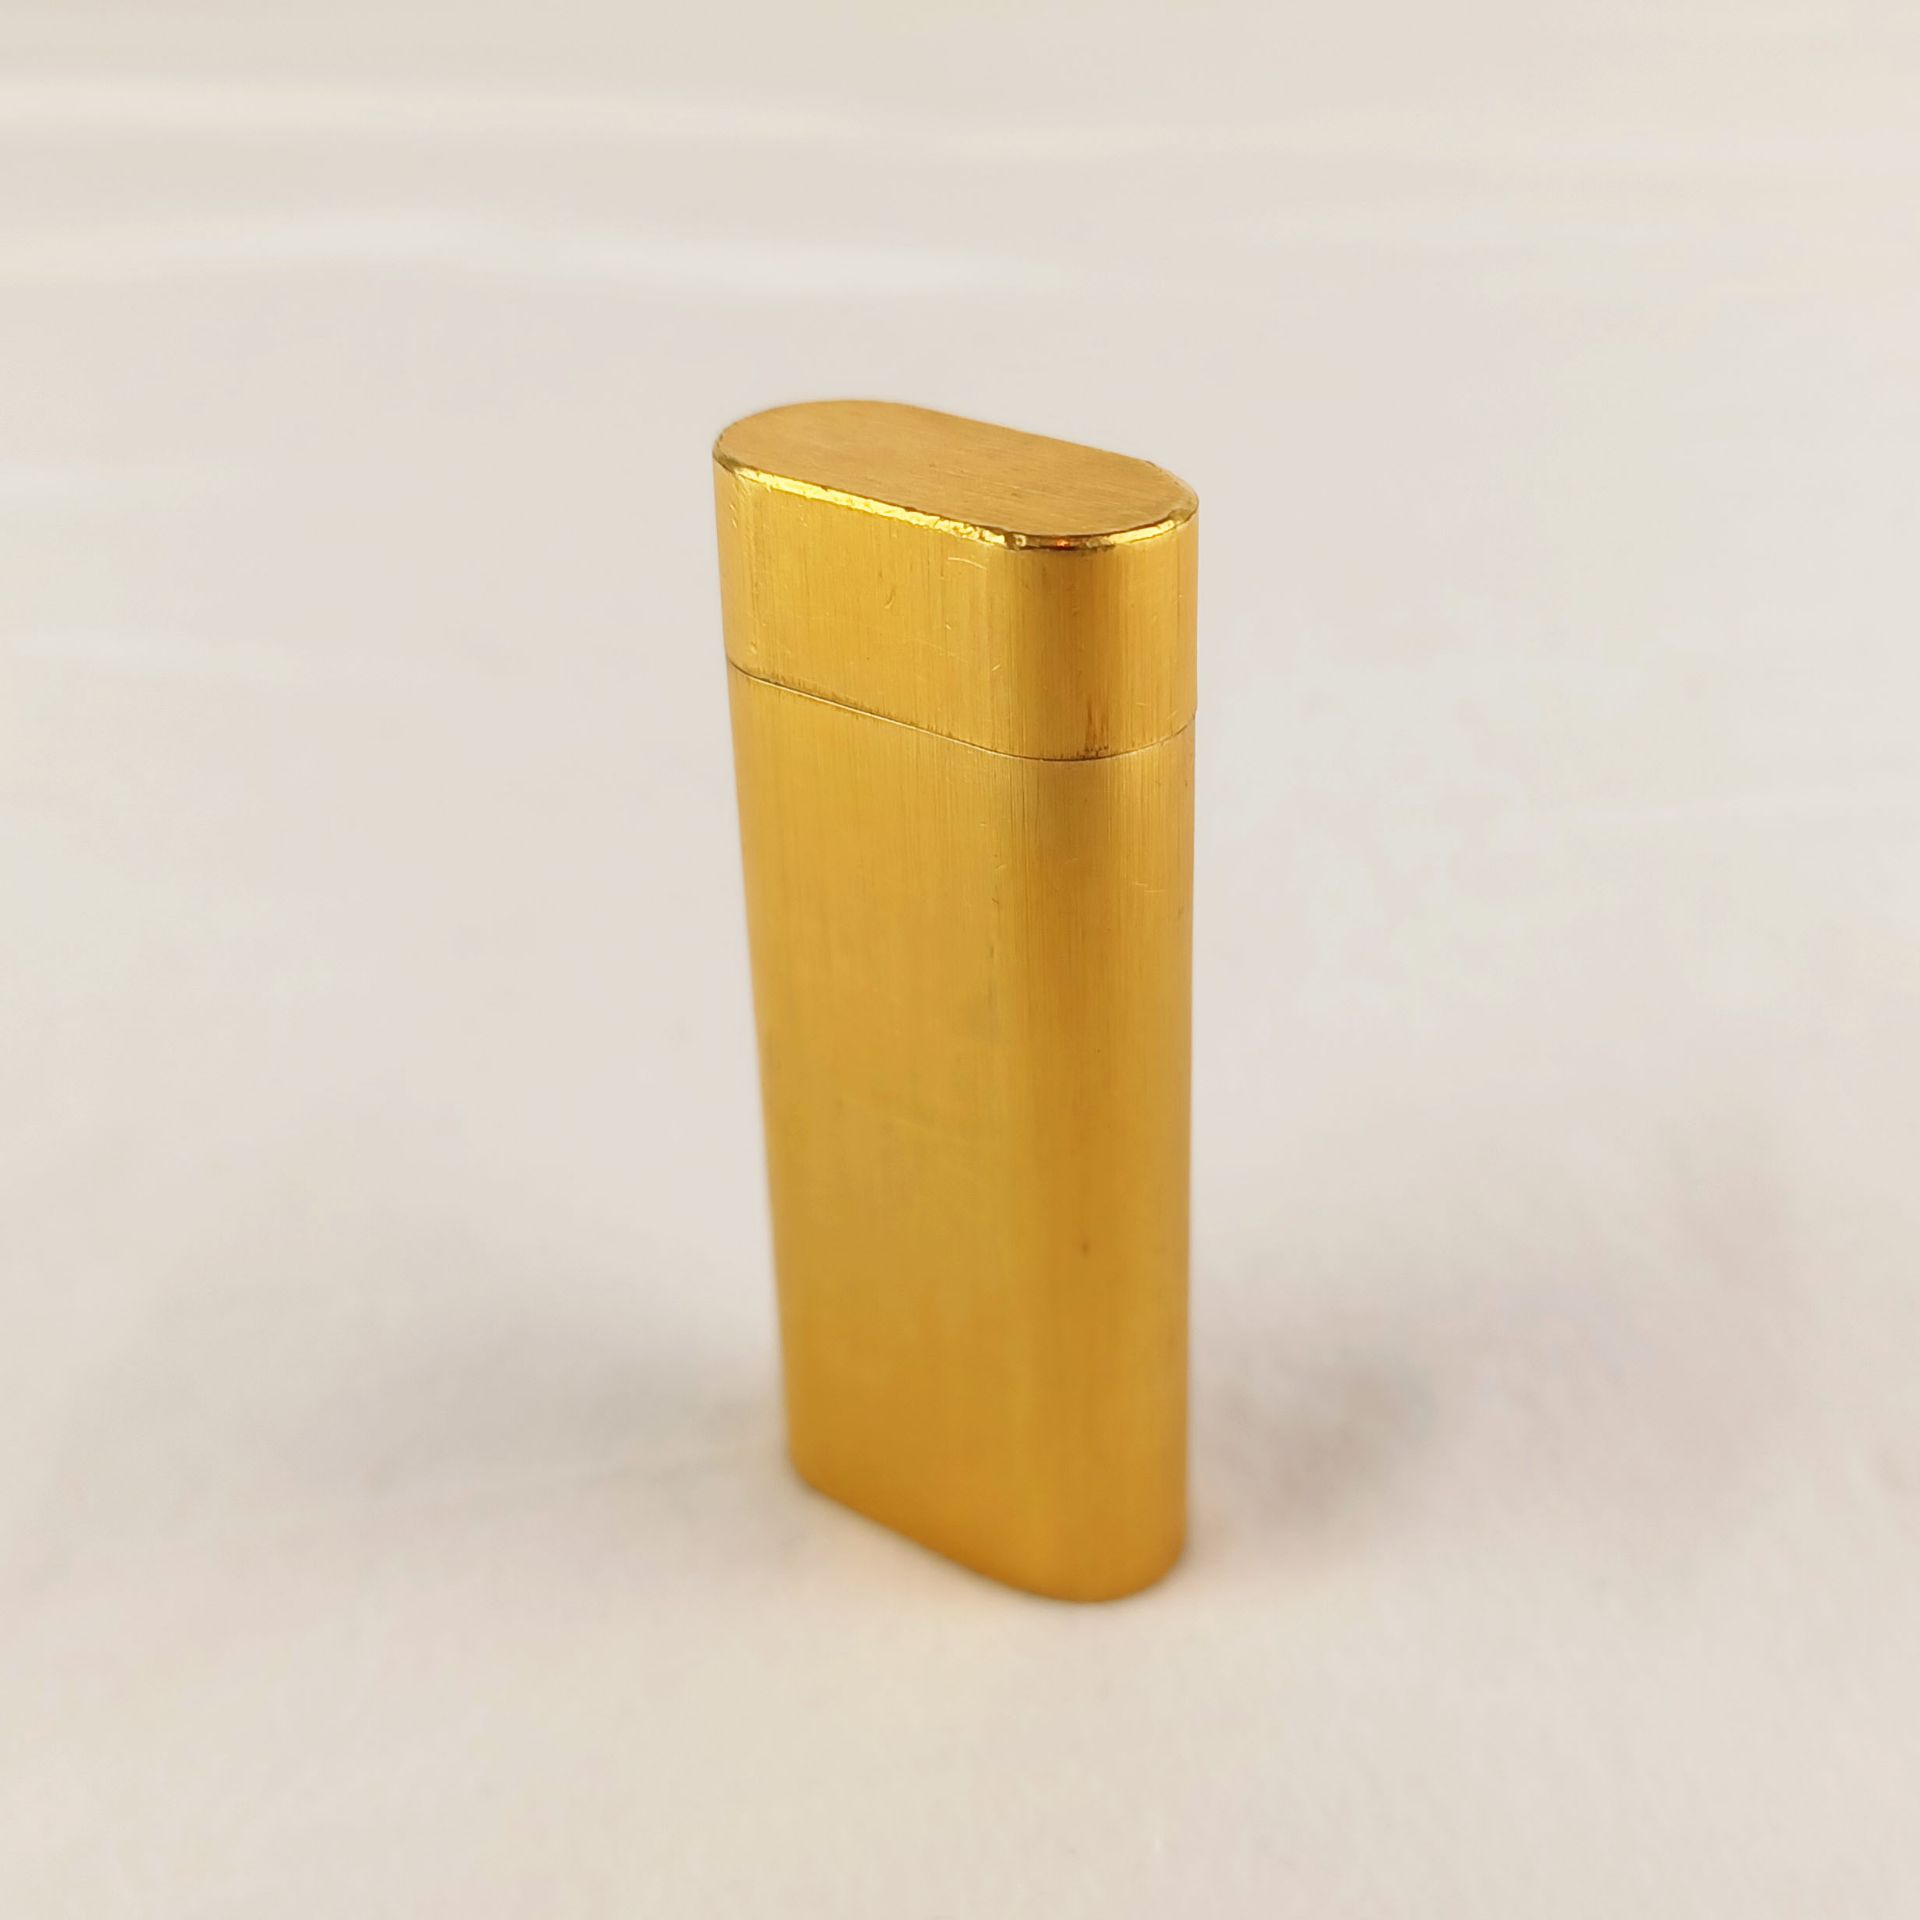 Cartier gold plated lighter 1993 - Image 2 of 6